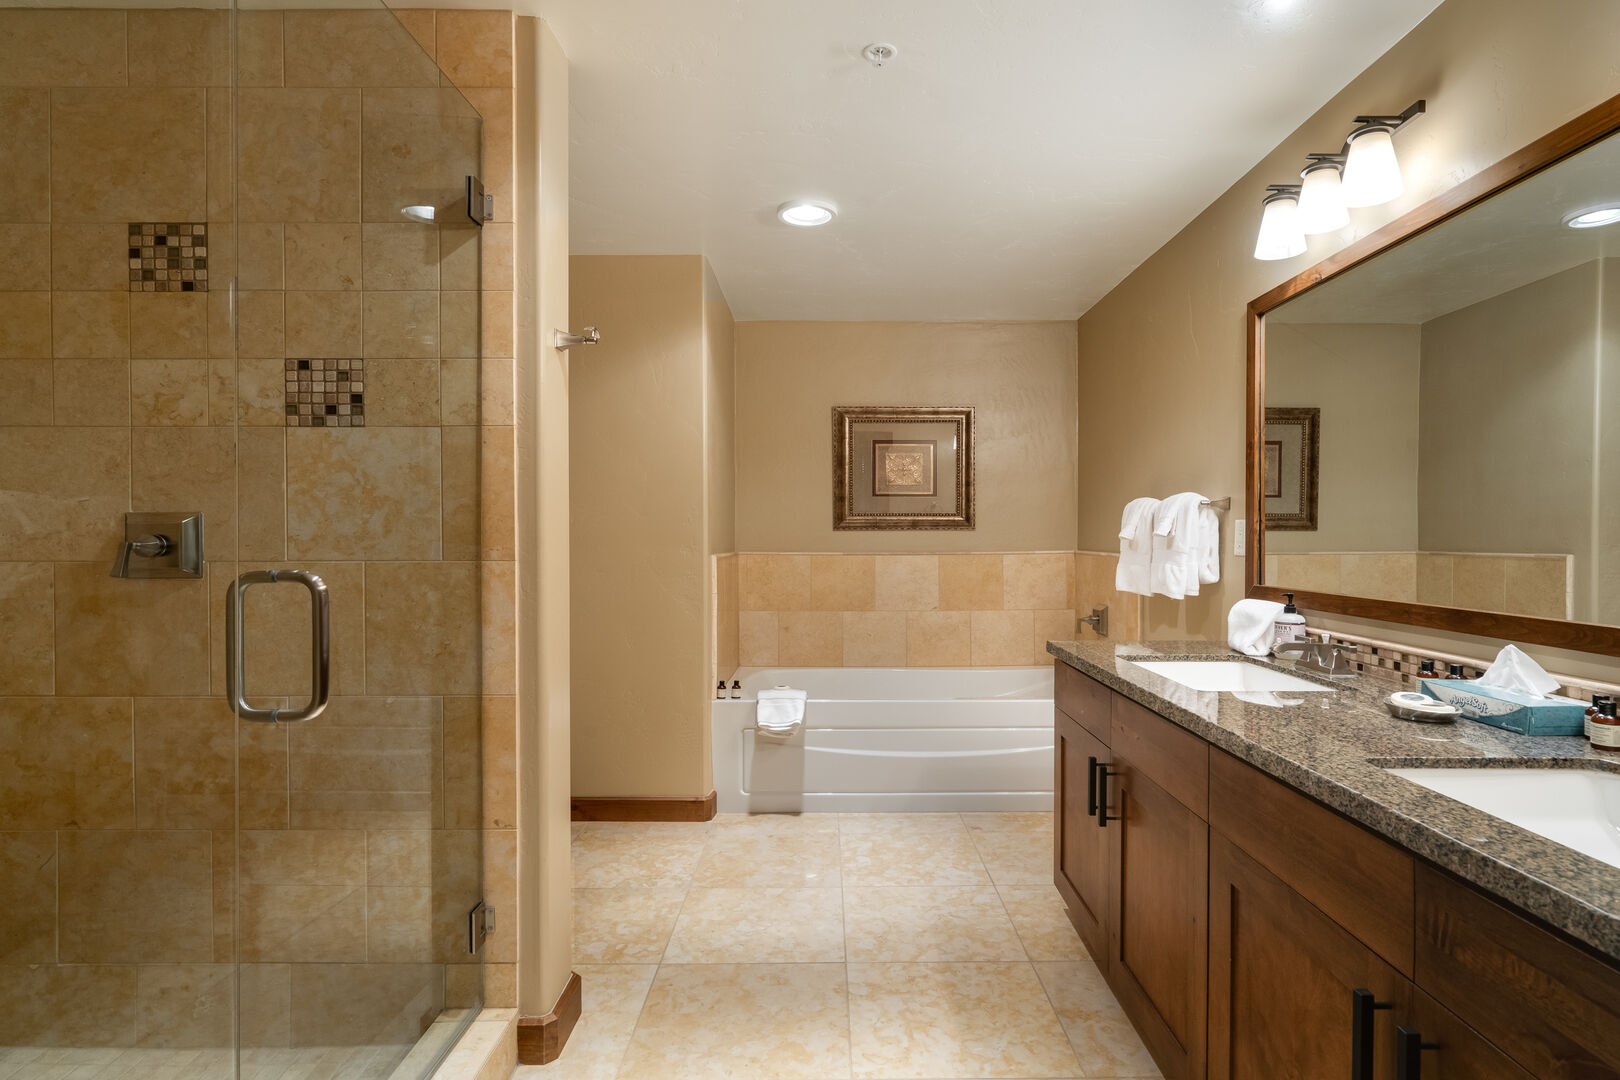 Master bathroom with soaking tub and separate shower